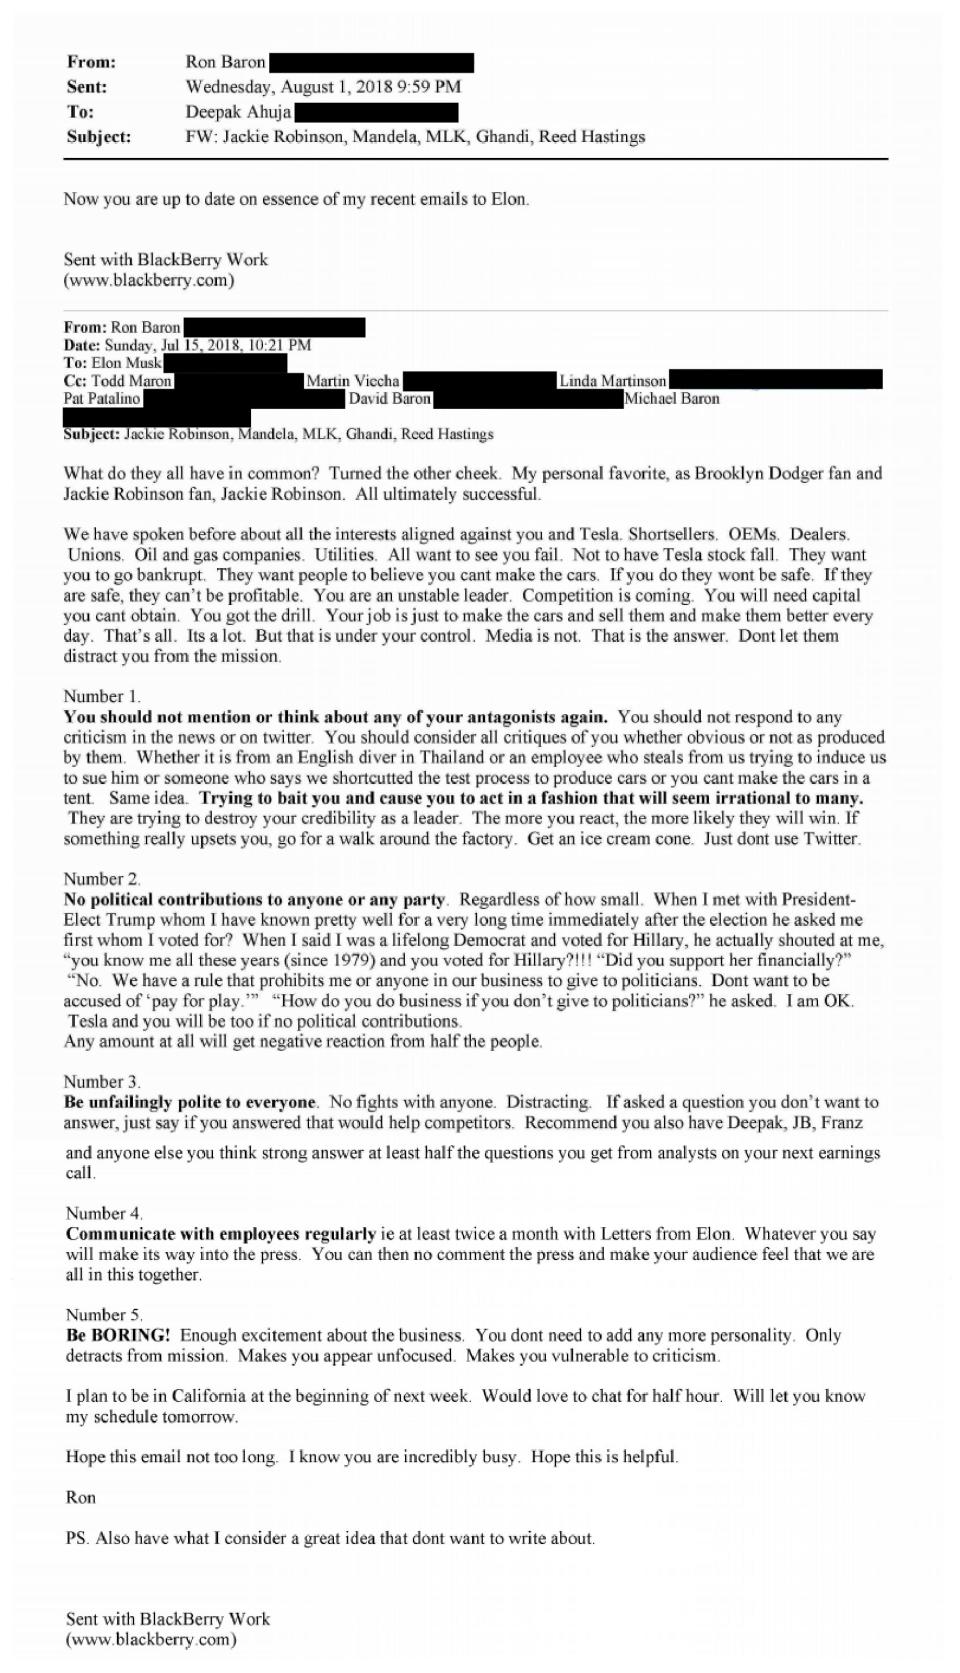 Ron Baron emailed Elon Musk on July 15, 2018.